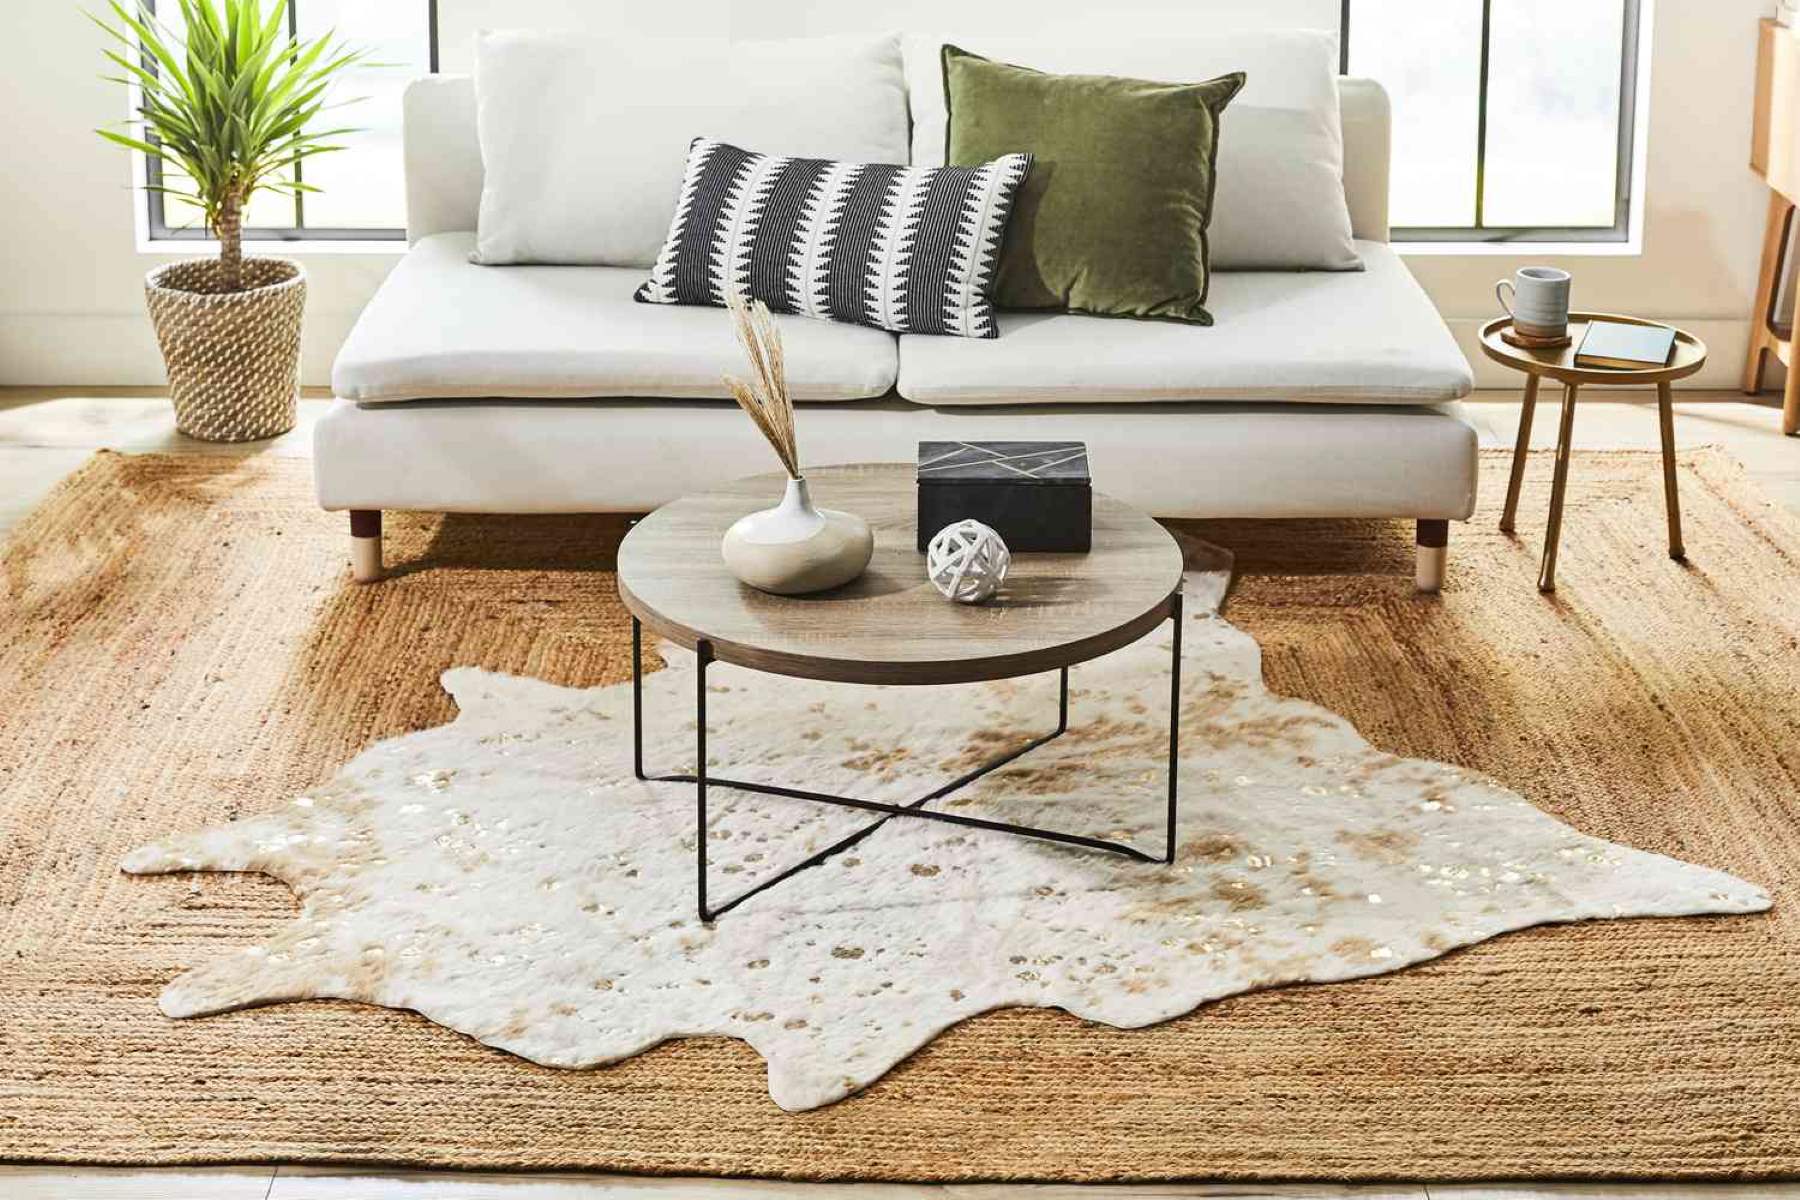 How Do You Layer Rugs